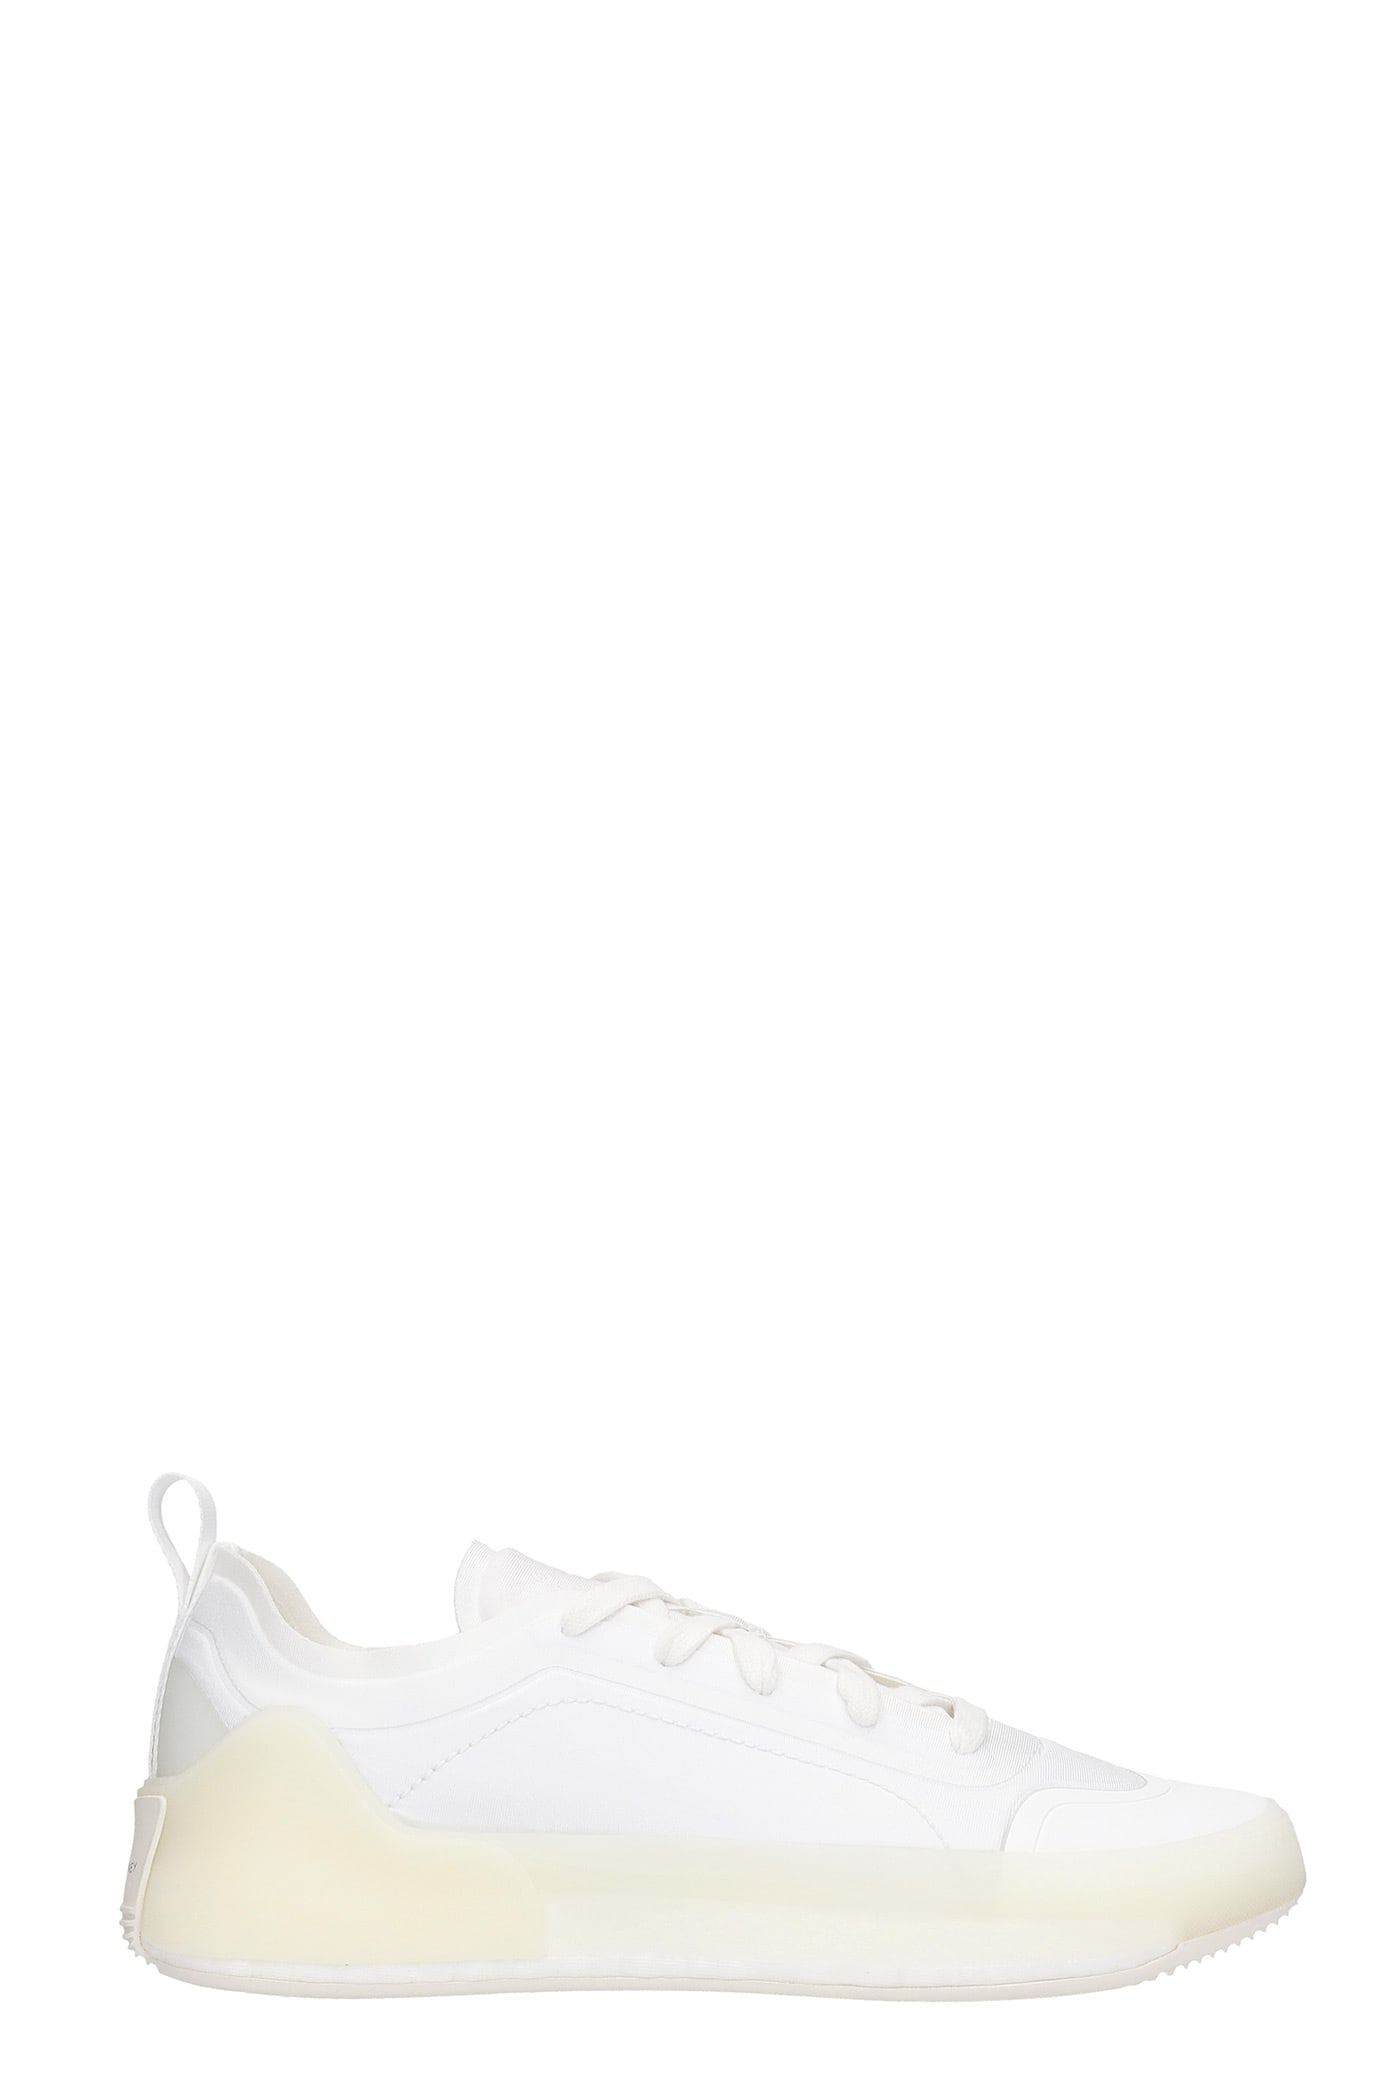 ADIDAS BY STELLA MCCARTNEY ASMC TREINO SNEAKERS IN WHITE SYNTHETIC FIBERS,FY1548